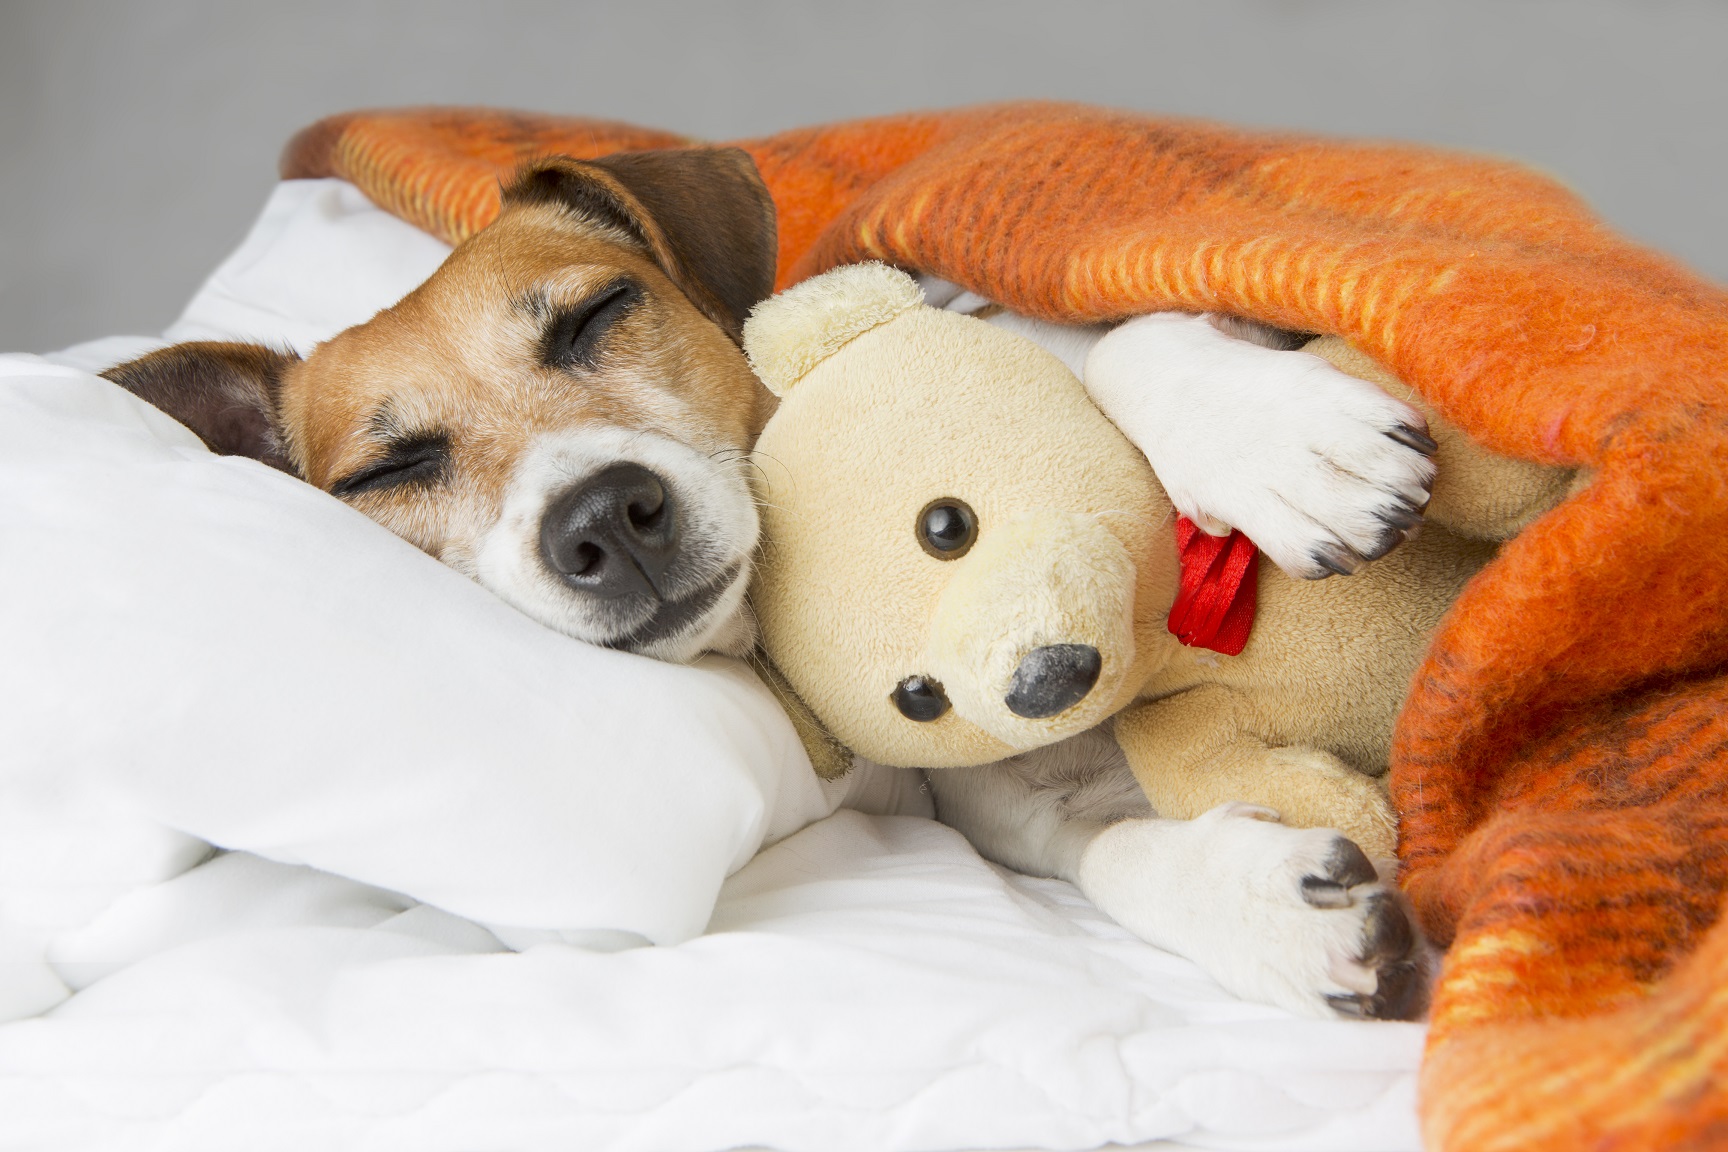 Beagel Dog Sleeping with a Plush Toy she got for Christmas